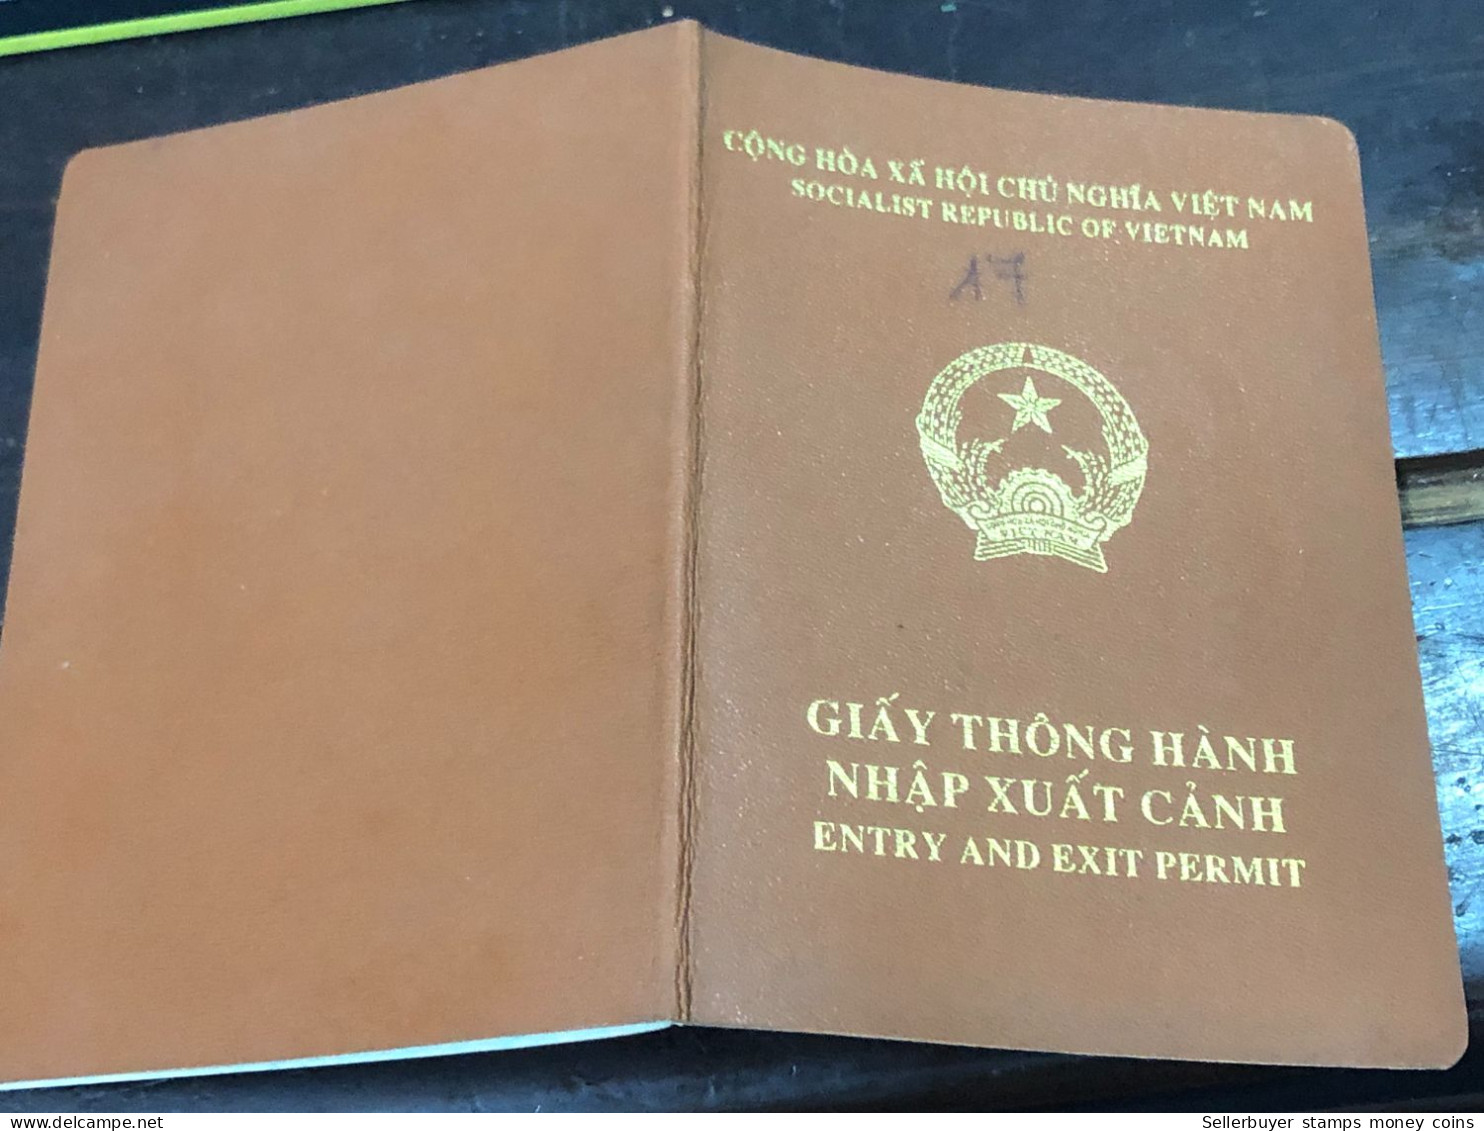 VIET NAM -OLD-GIAY THONG HANH XUAT CANH-ID PASSPORT-name-NGUYEN QUOC TE-2009-1pcs Book - Collezioni